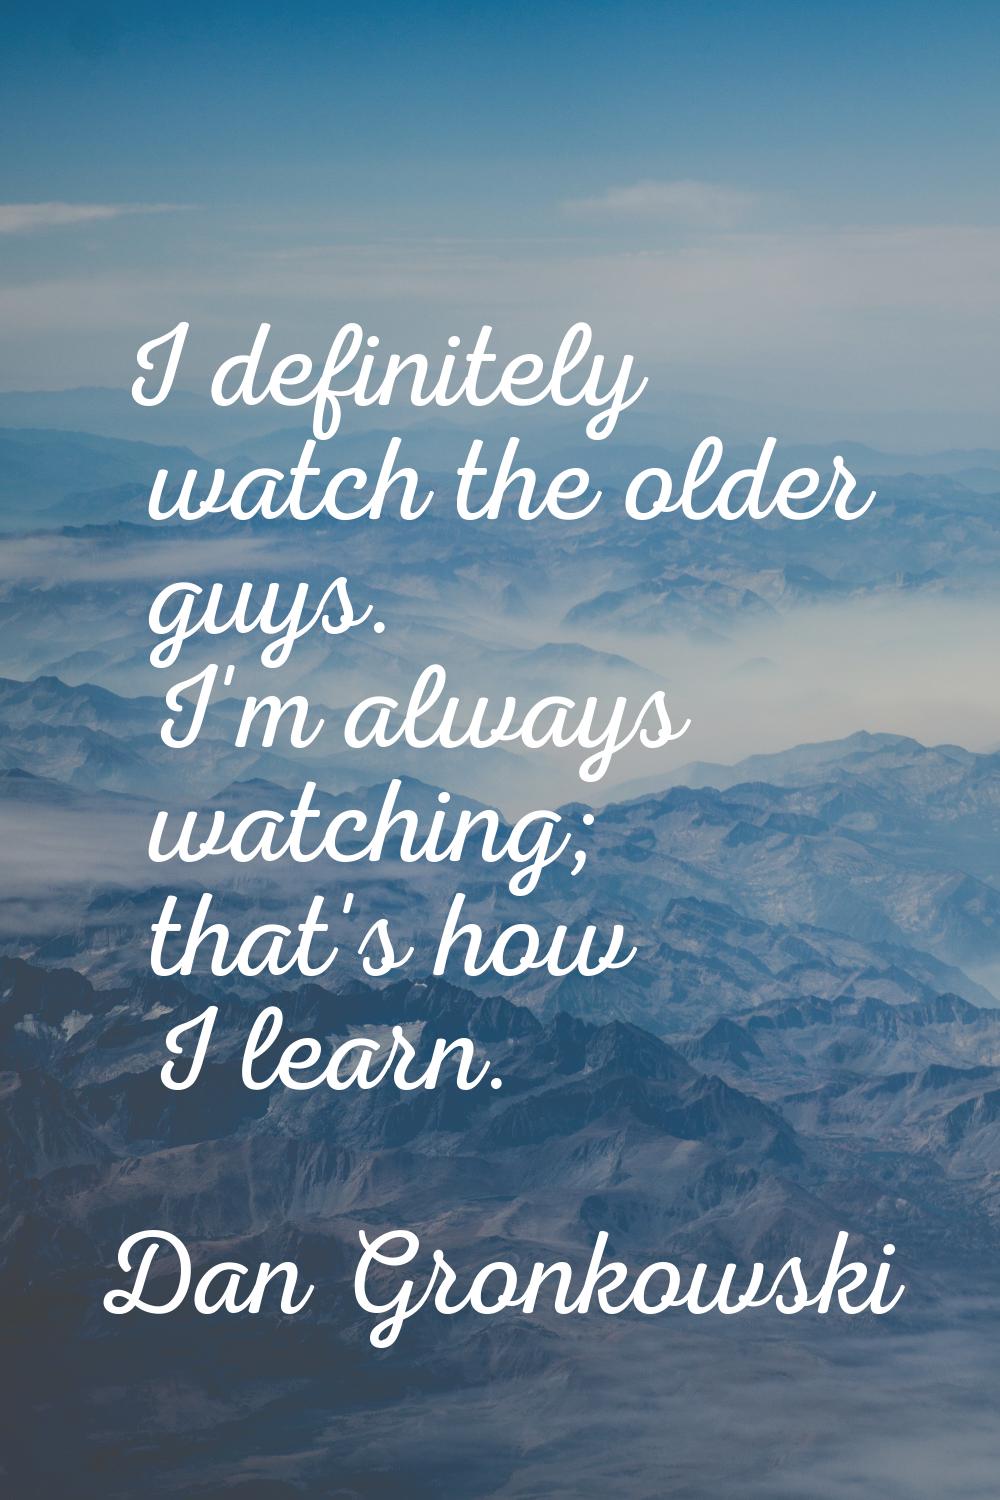 I definitely watch the older guys. I'm always watching; that's how I learn.